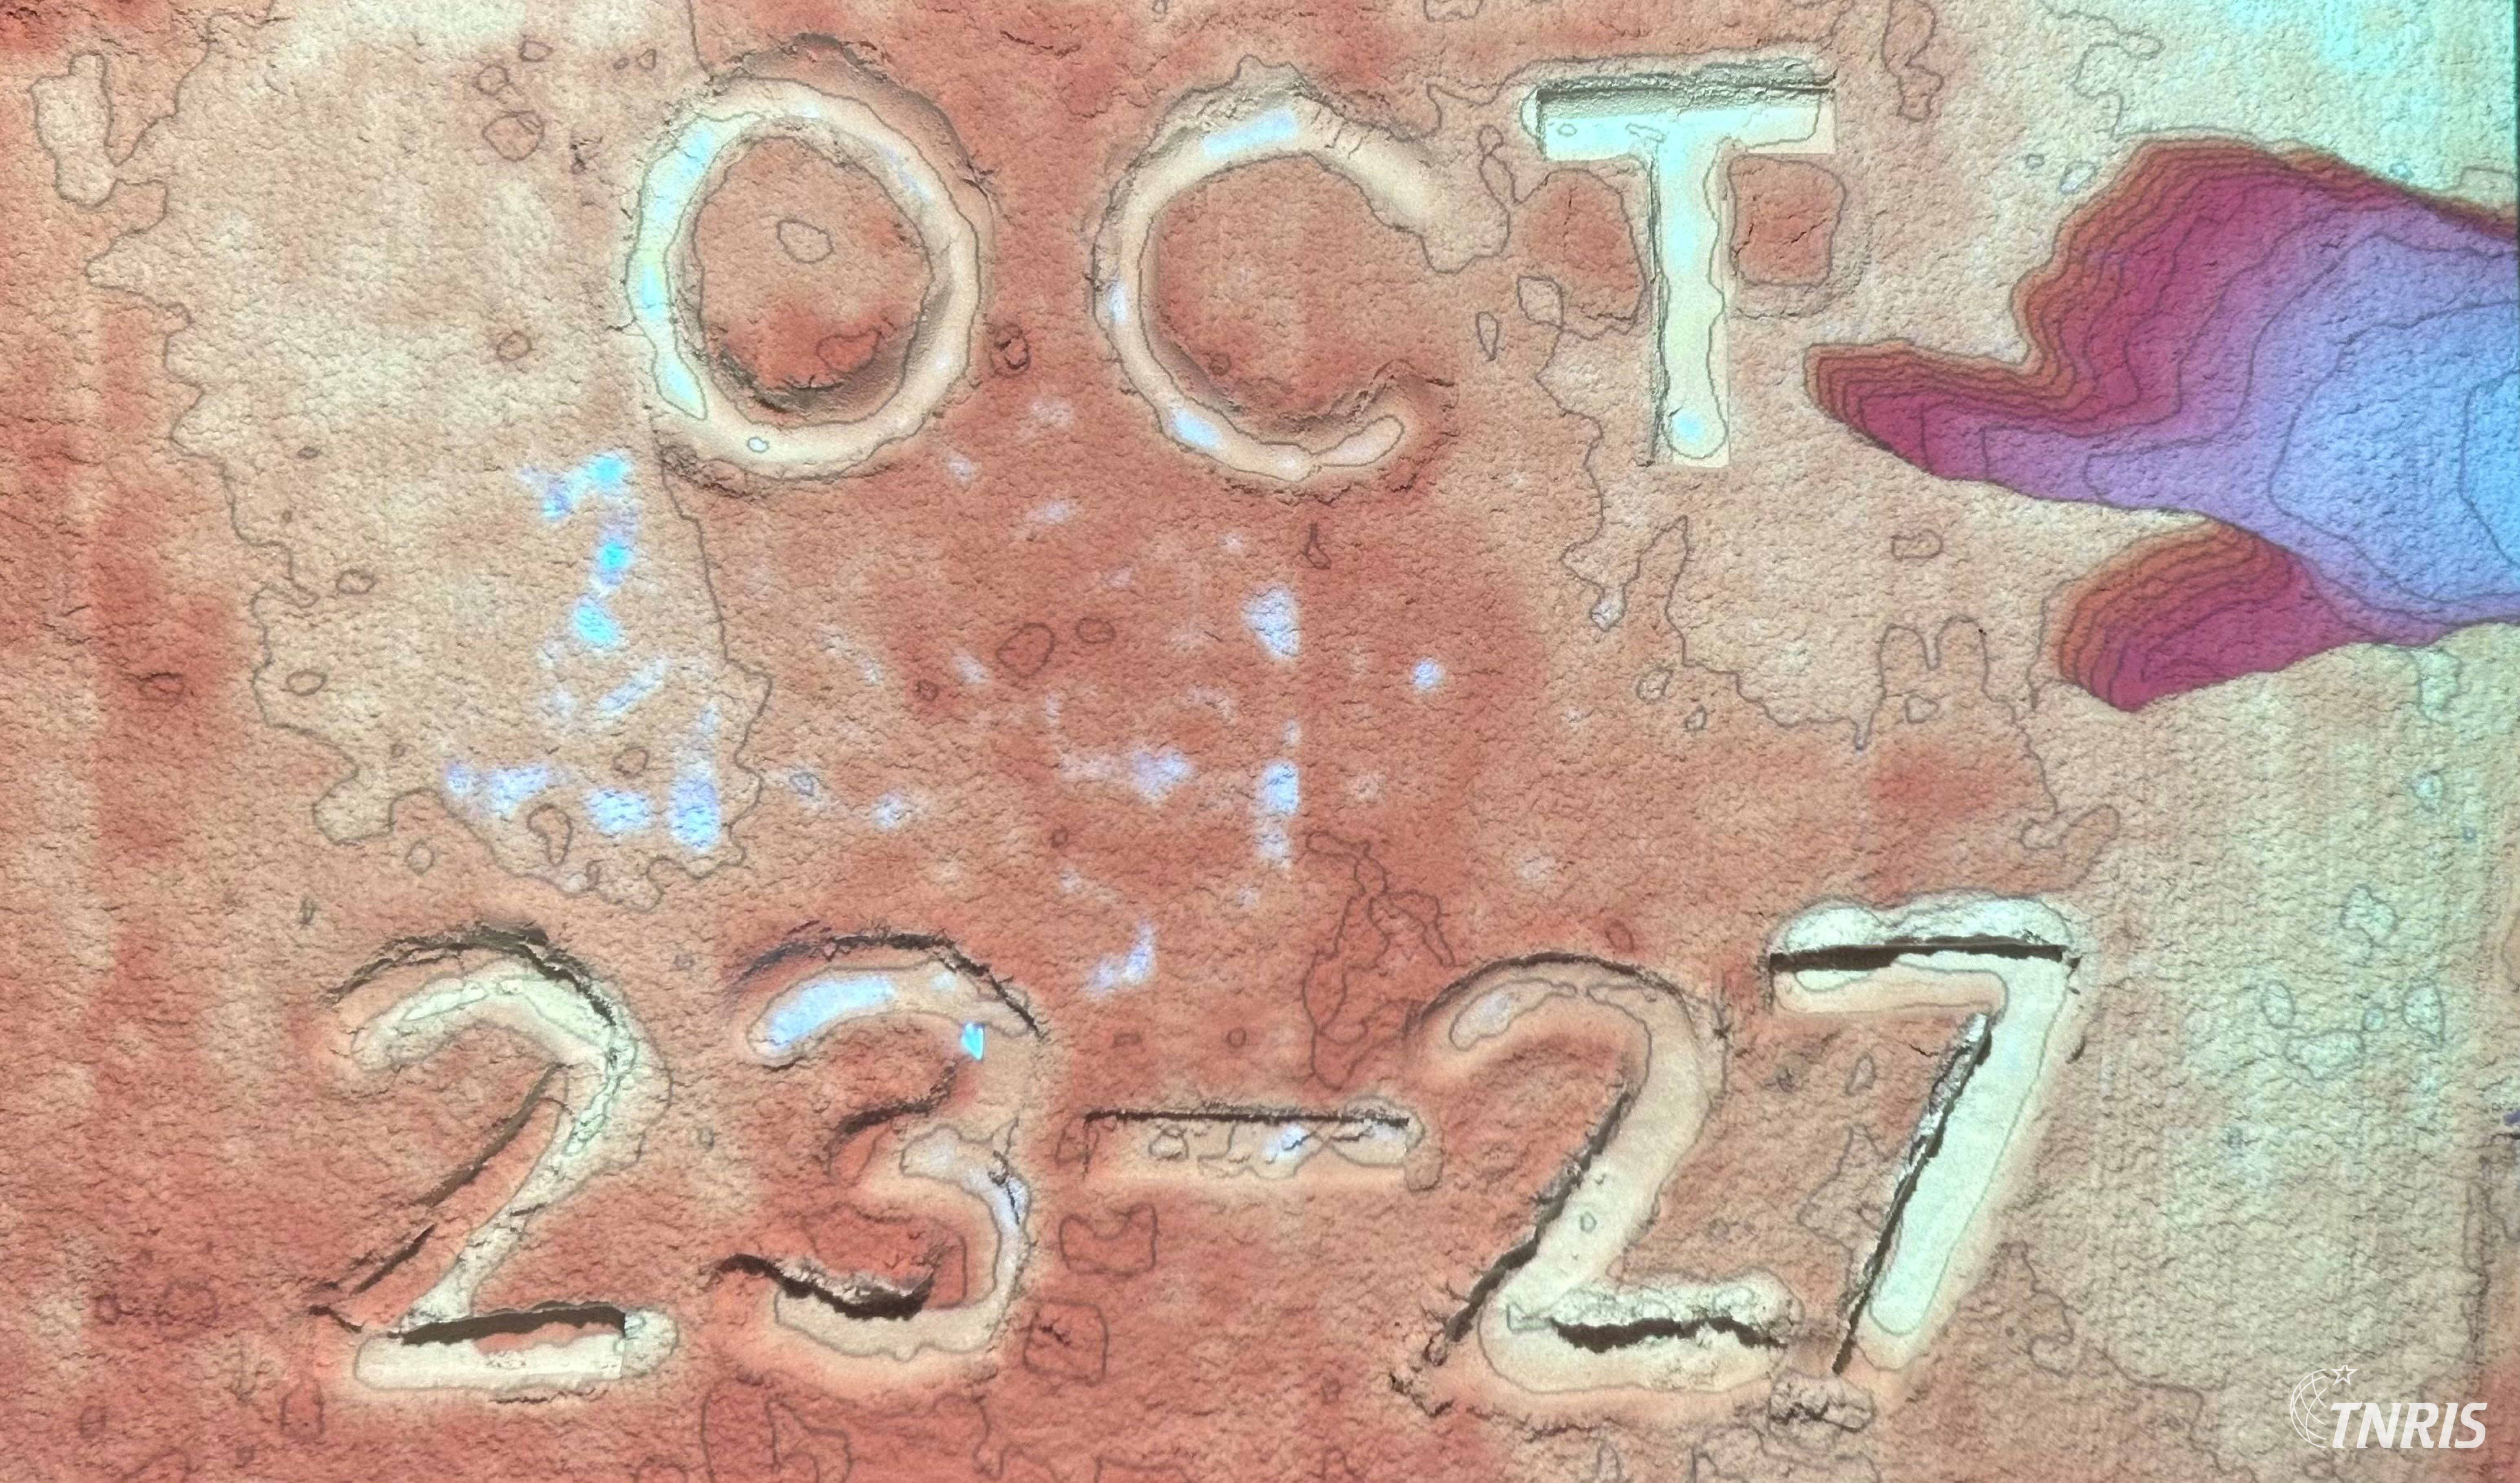 Oct 23-27 written in LiDAR sand with pointing hand